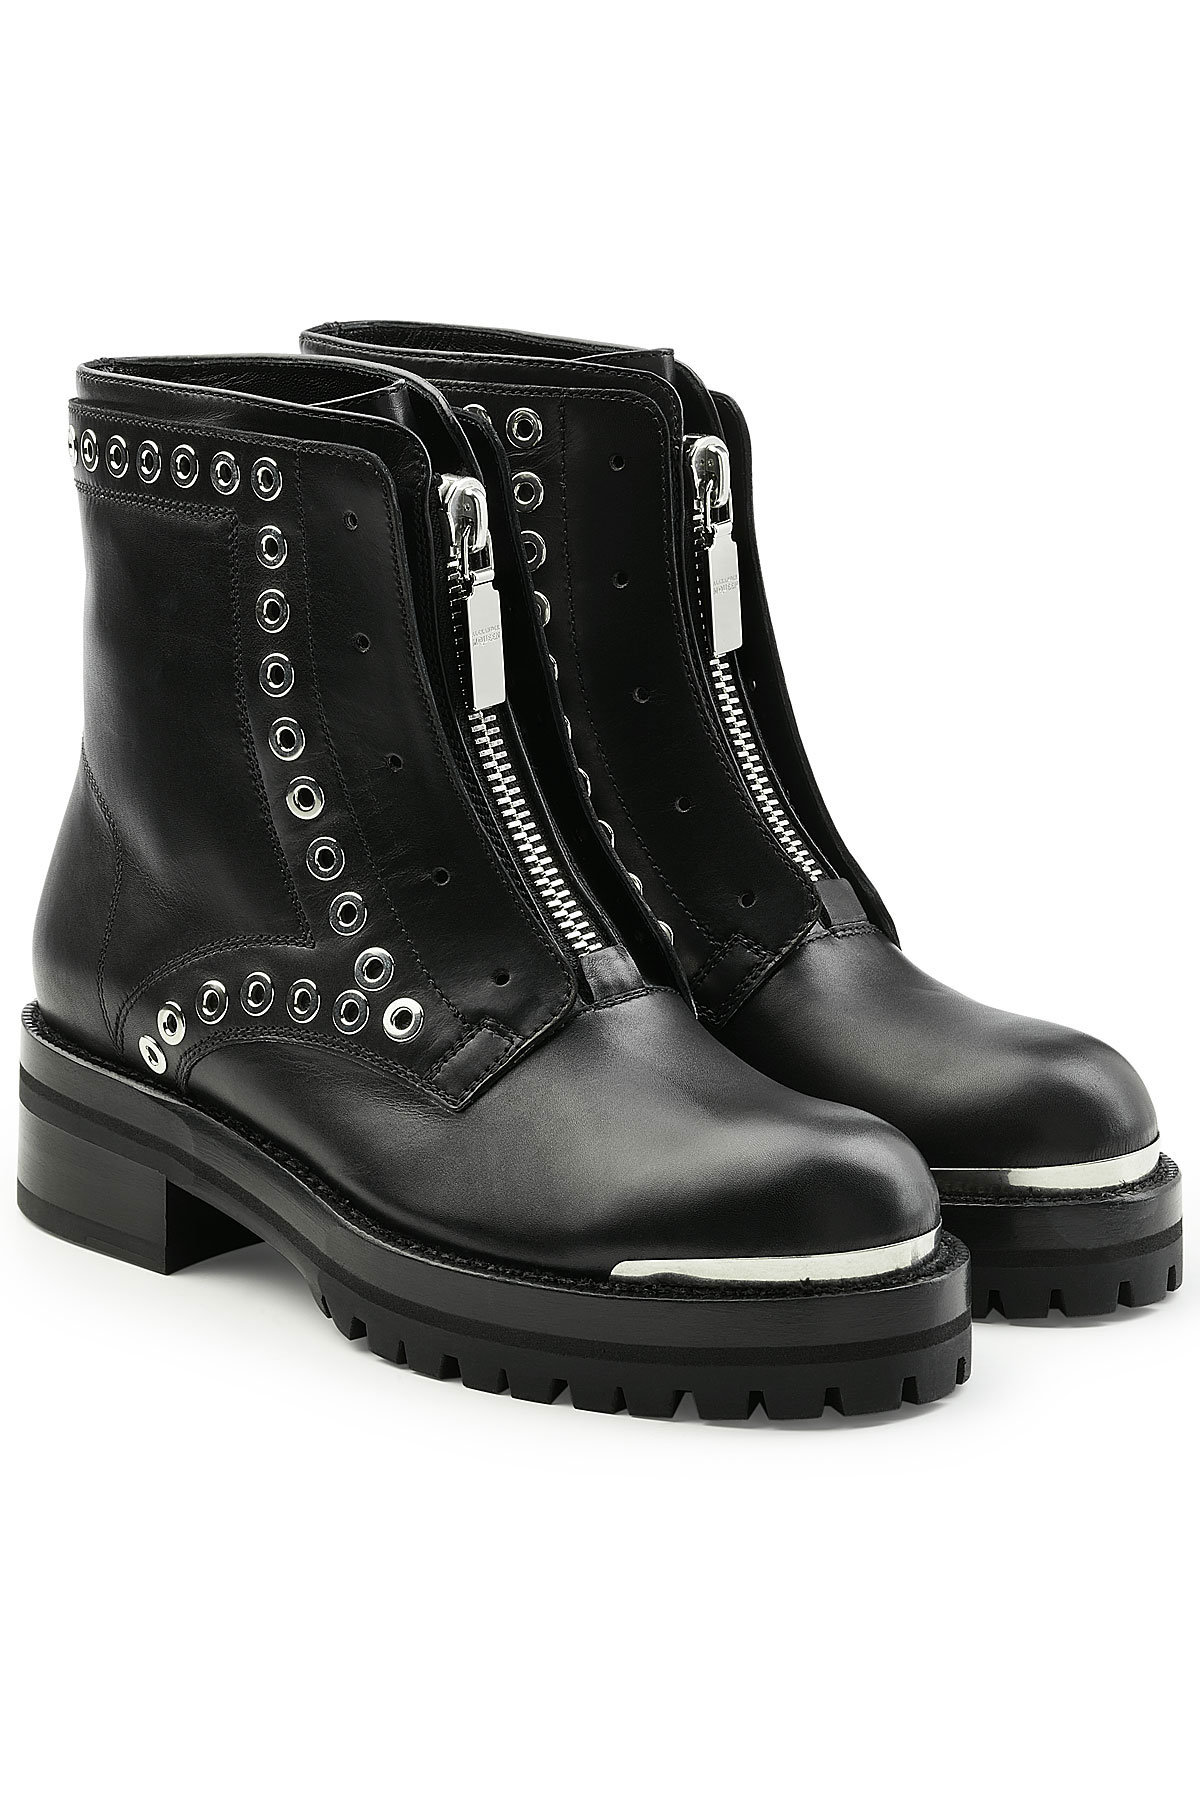 Alexander McQueen - Stud Flat Embellished Leather Ankle Boots